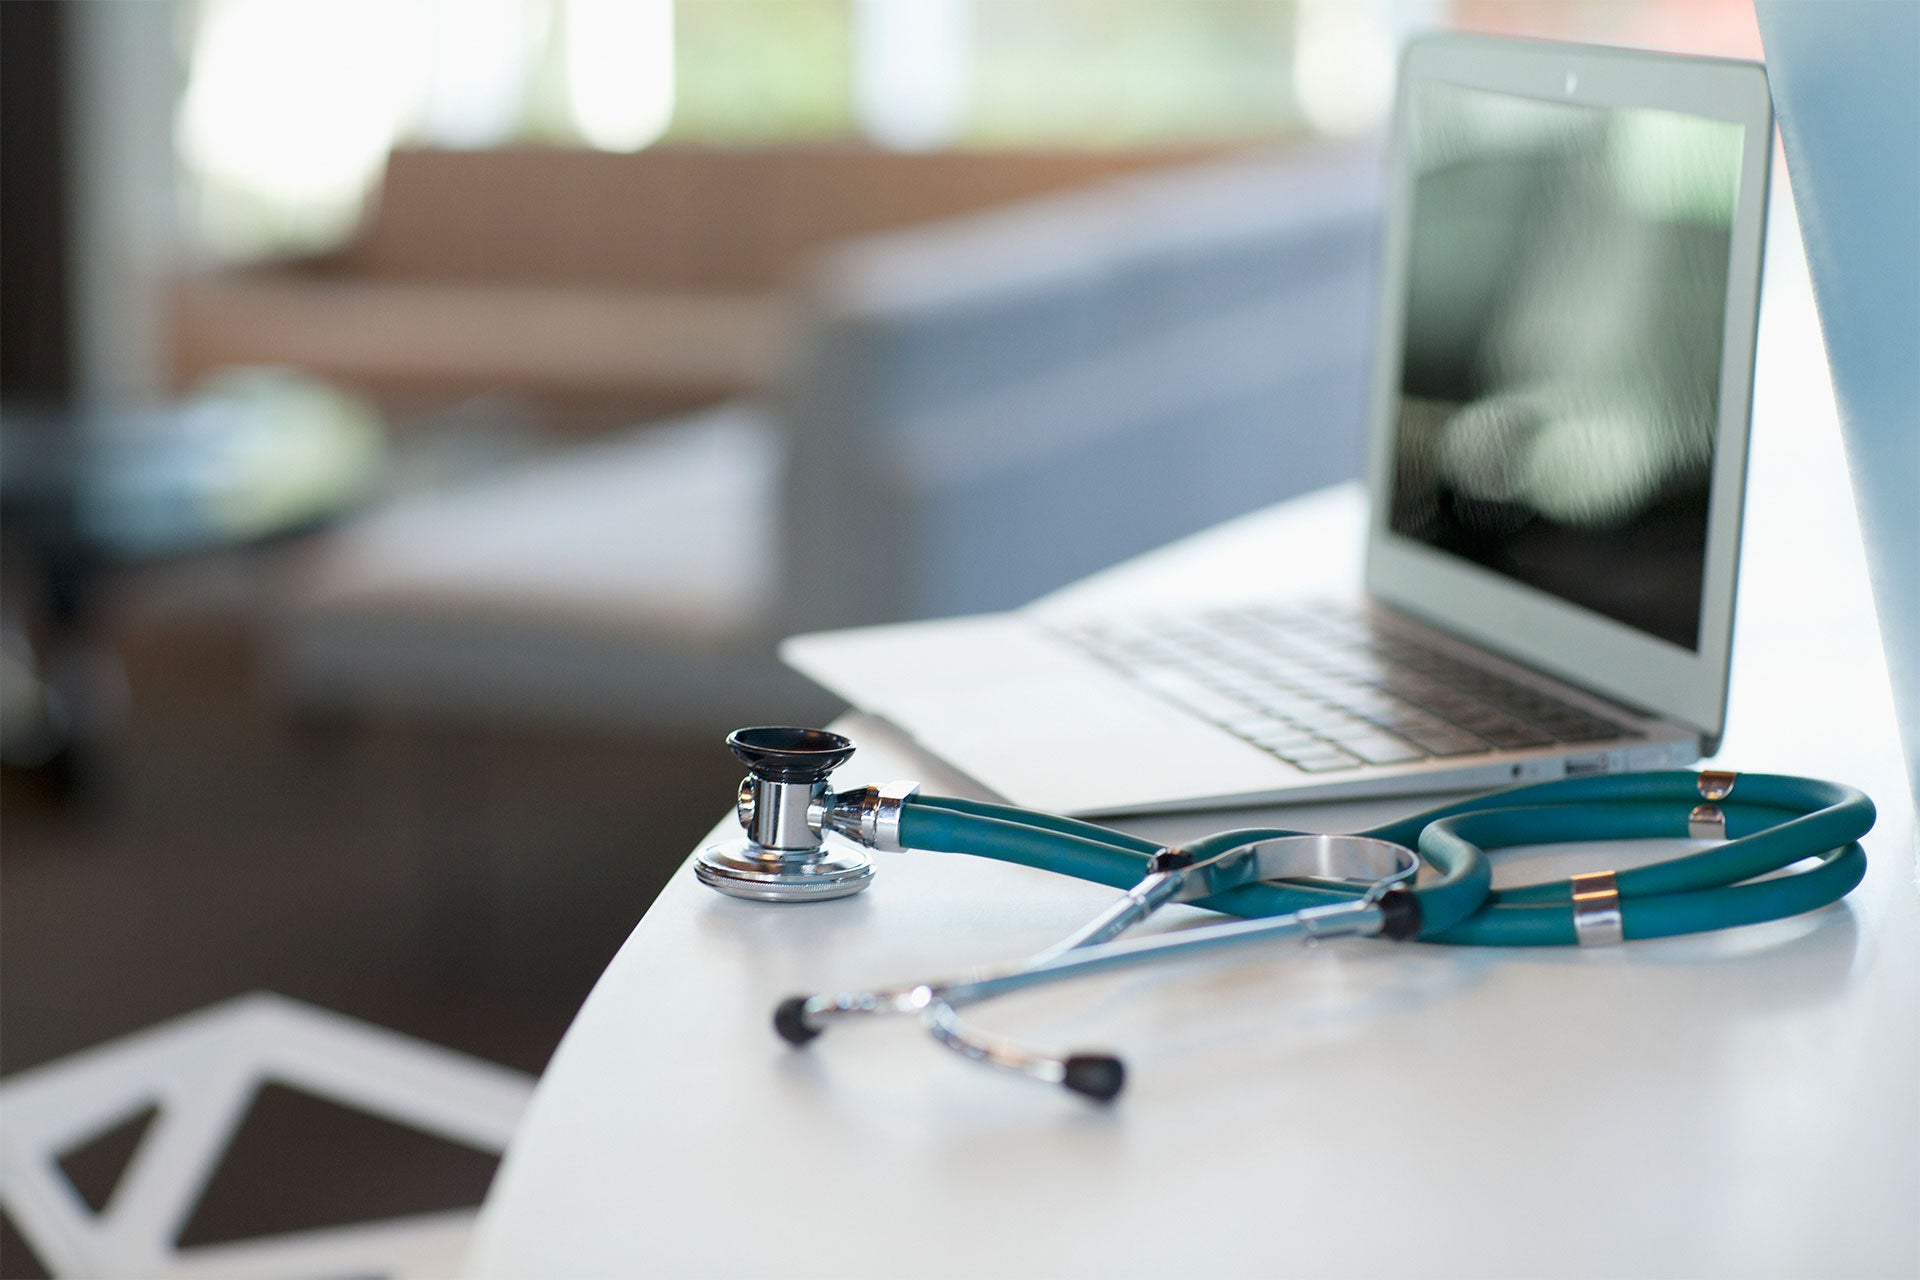 Stethoscope and laptop on desk.